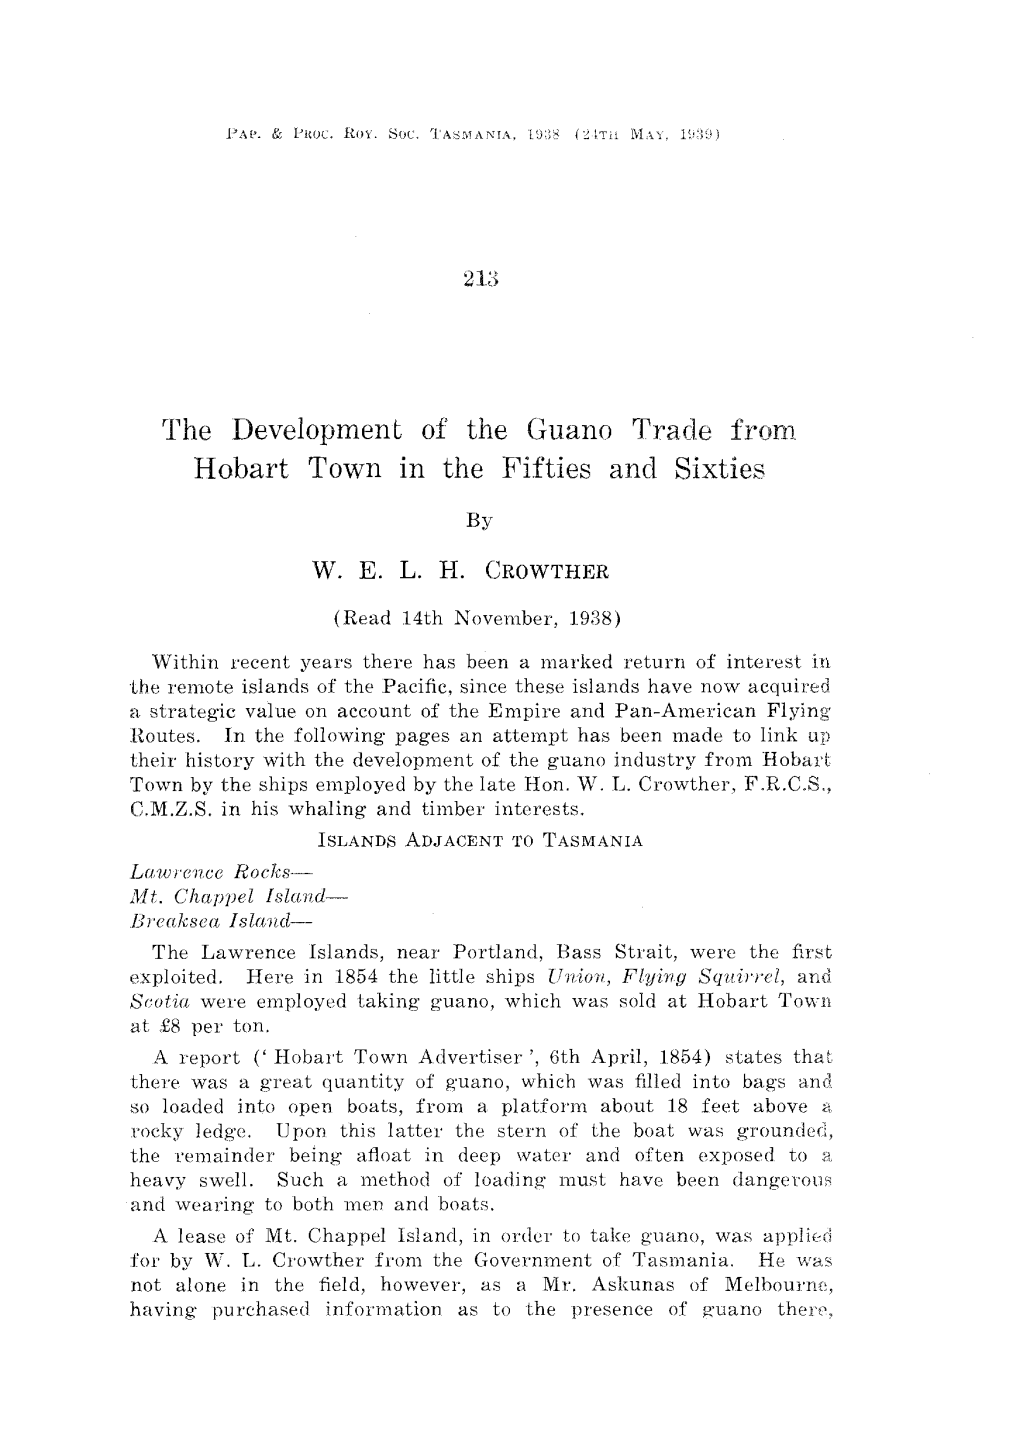 The Development of the Guano Trade from Hobart Town in the Fifties and Sixties